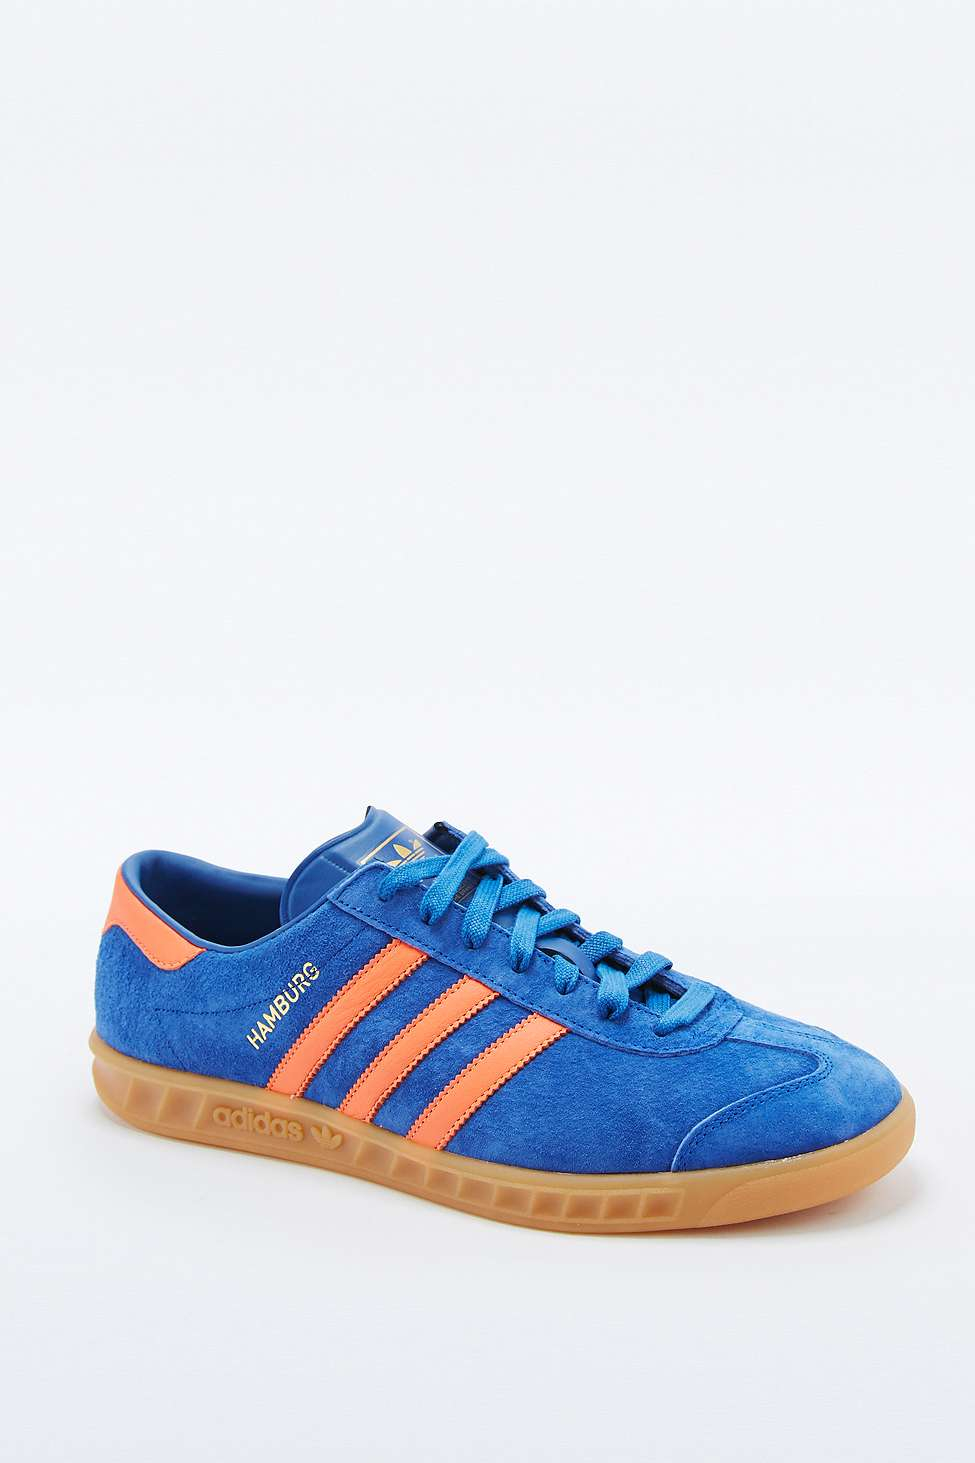 adidas hamburg trainers blue and orange adidas Shoes & Sneakers On Sale